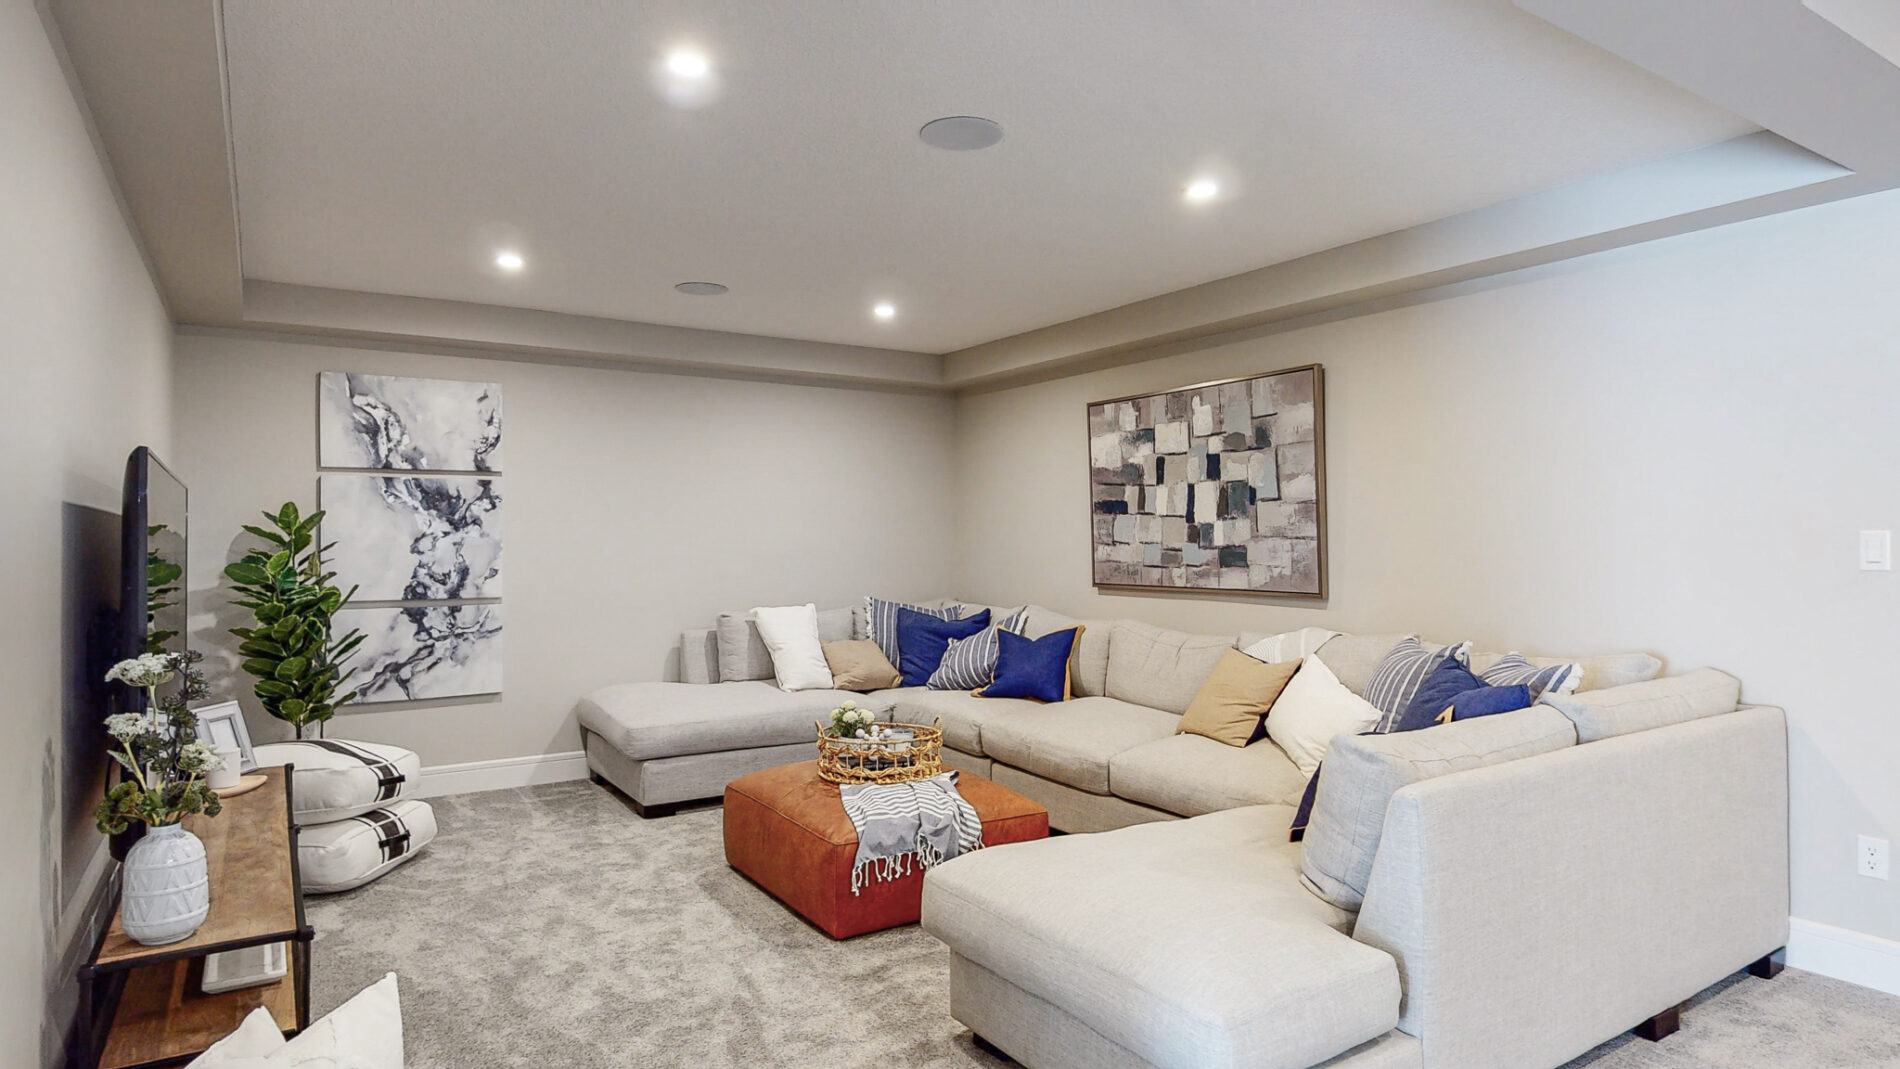 The large bonus room of the Kalliope showhome in Ardrossan with tray ceiling detail, and space for an oversized sectional and ottoman